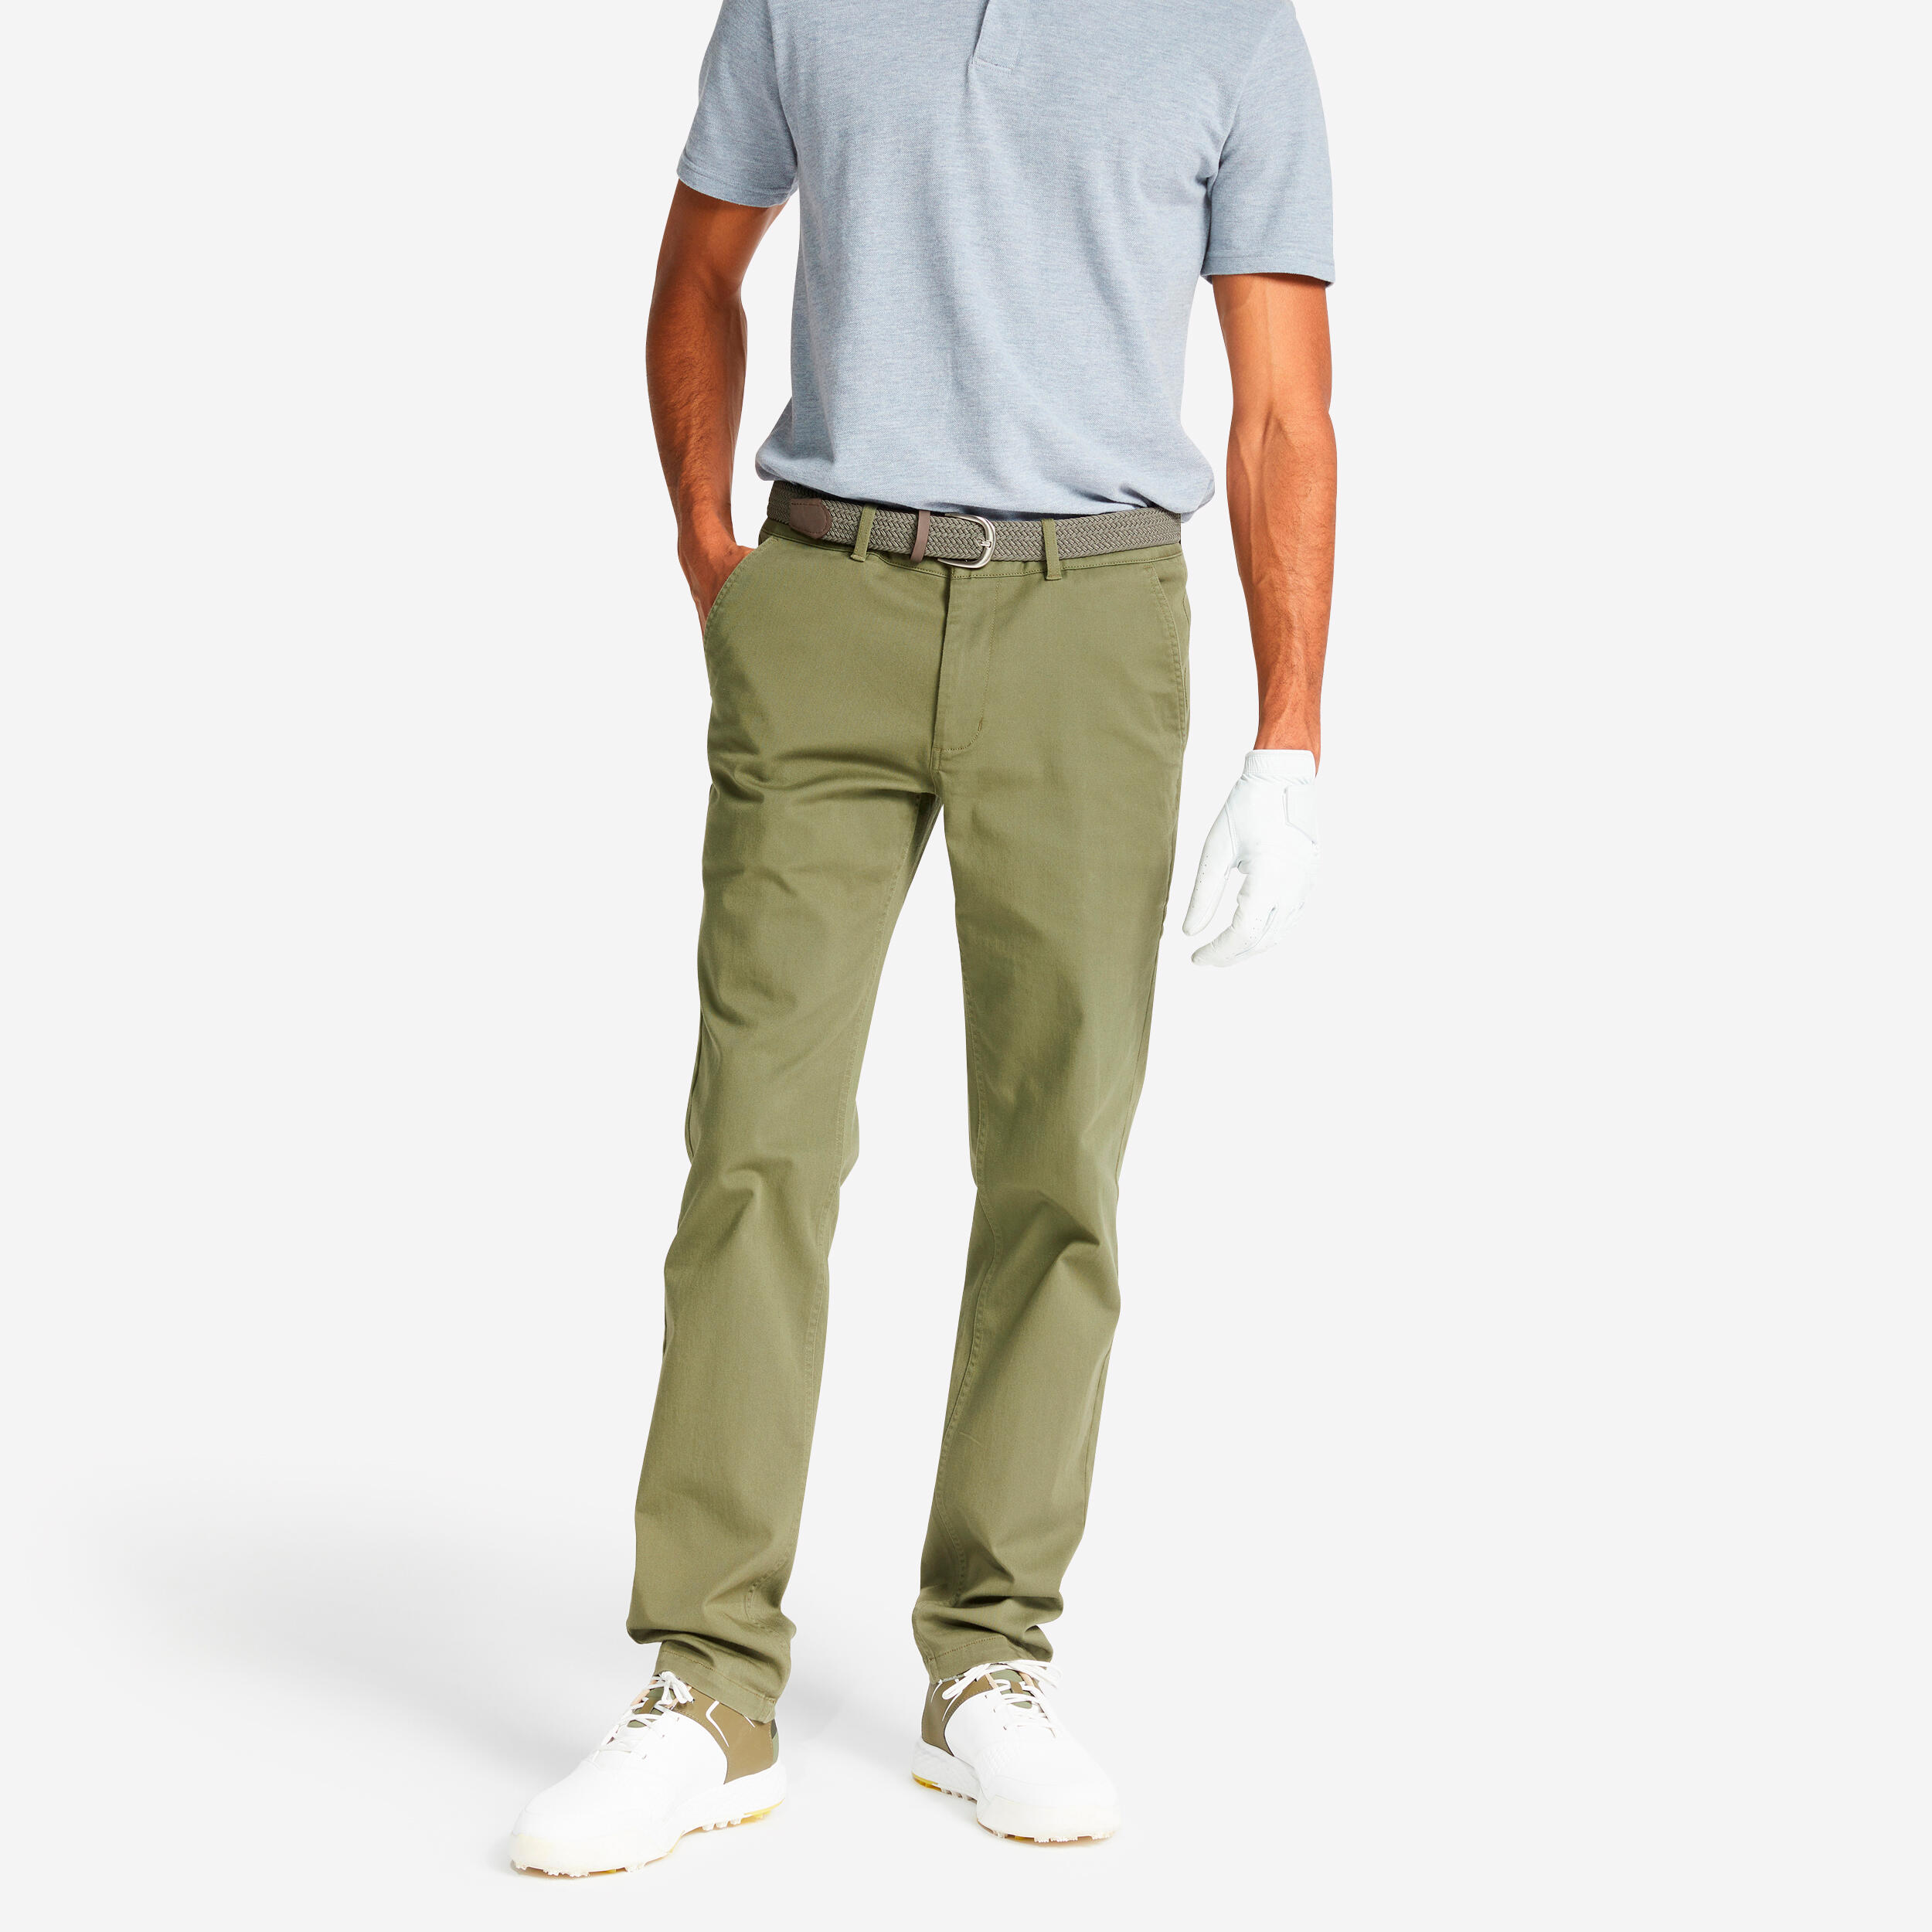 Mens Golf Clothing Store  Shirts Trousers  Golf Shoes  Function18